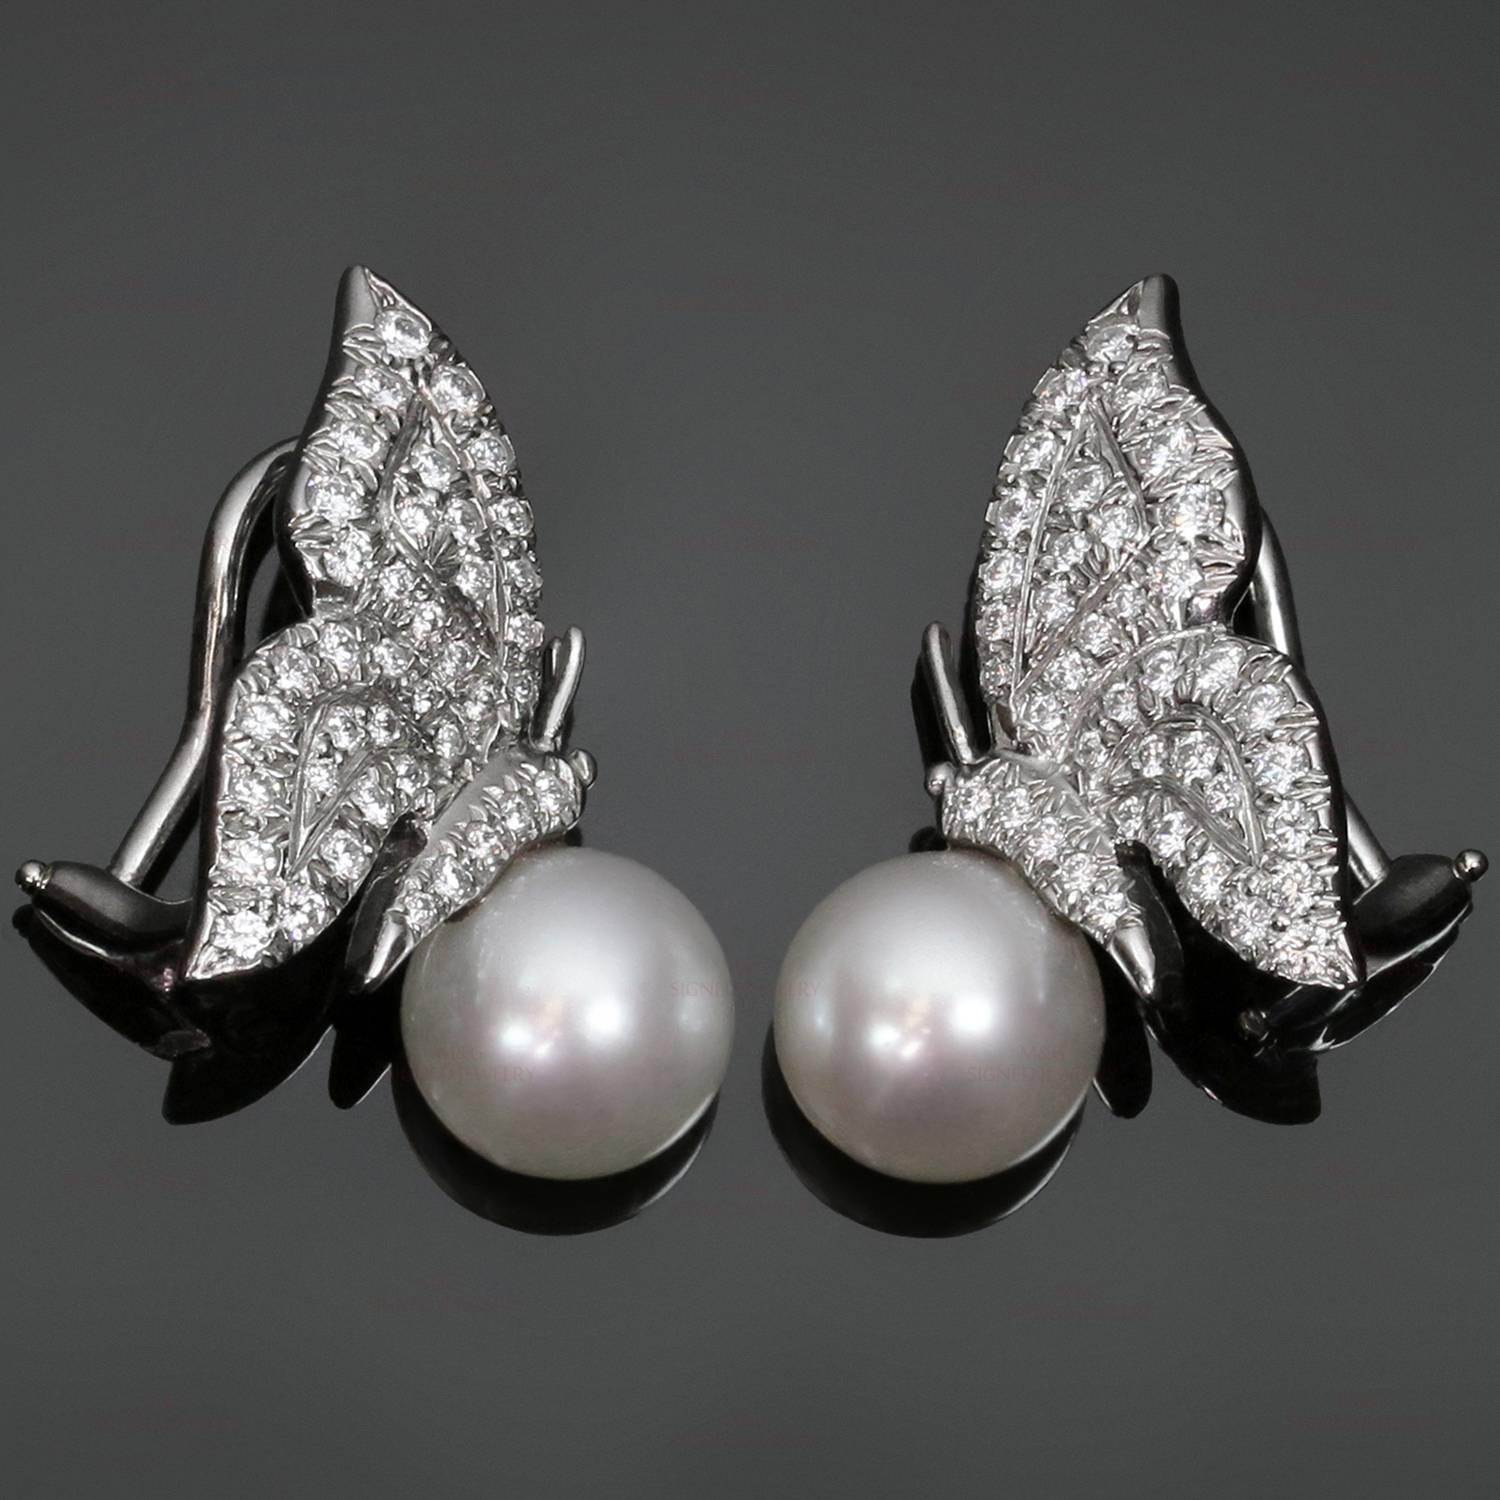 These fabulous Tiffany clip-on earrings feature an elegant butterfly design crafted in platinum and pave-set with sparkling brilliant-cut round diamonds of an estimated 1.12 carats and completed with cultured pearls measuring an estimated 8.0mm.